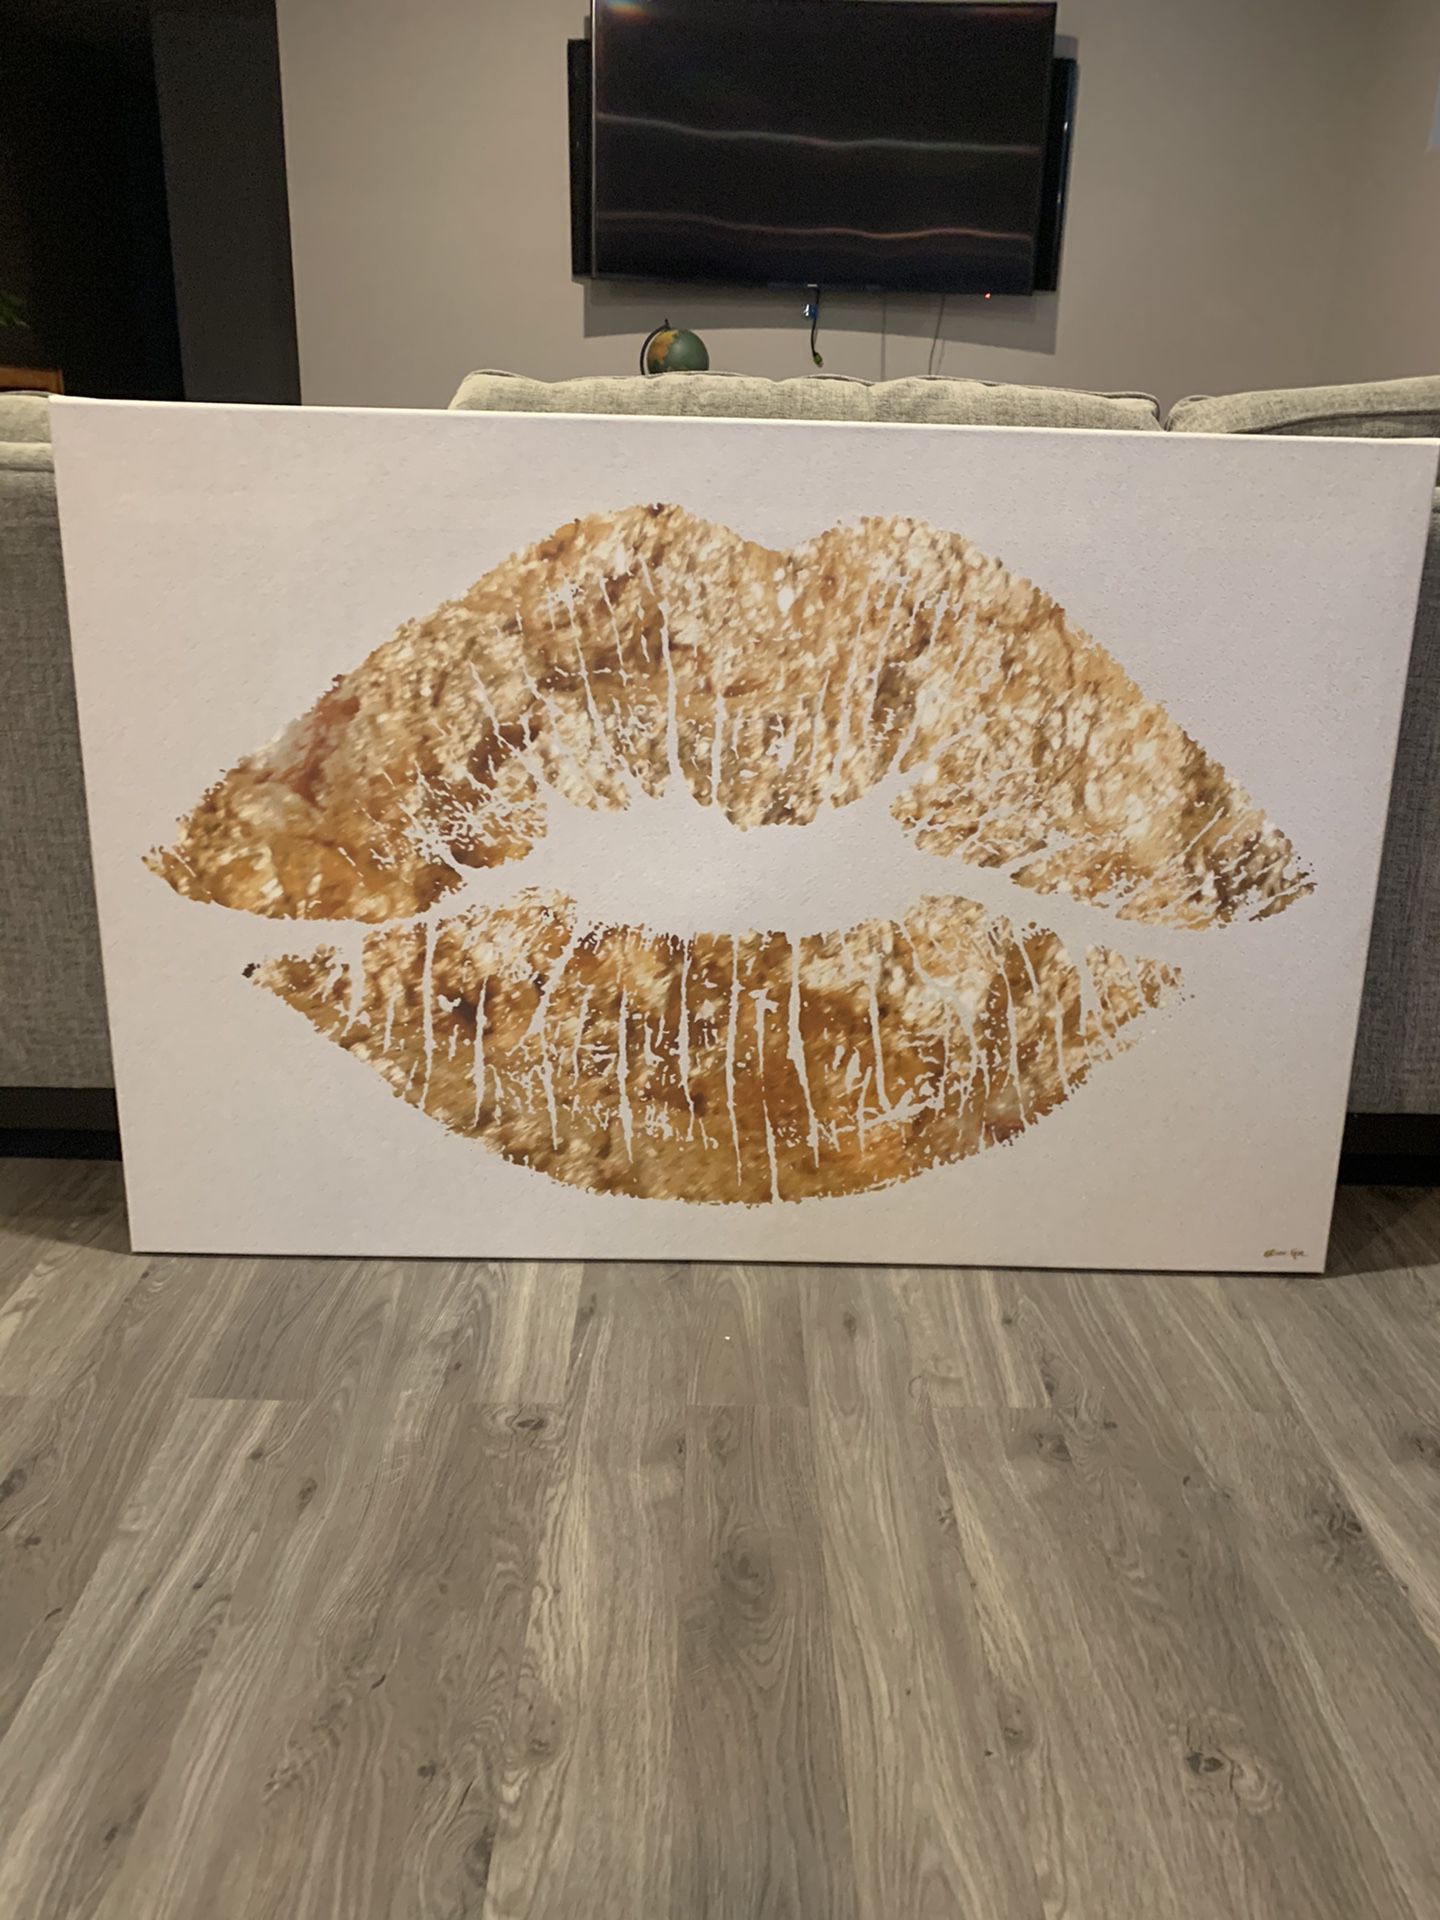 Oliver Gal solid kiss gold art 45” x 30”